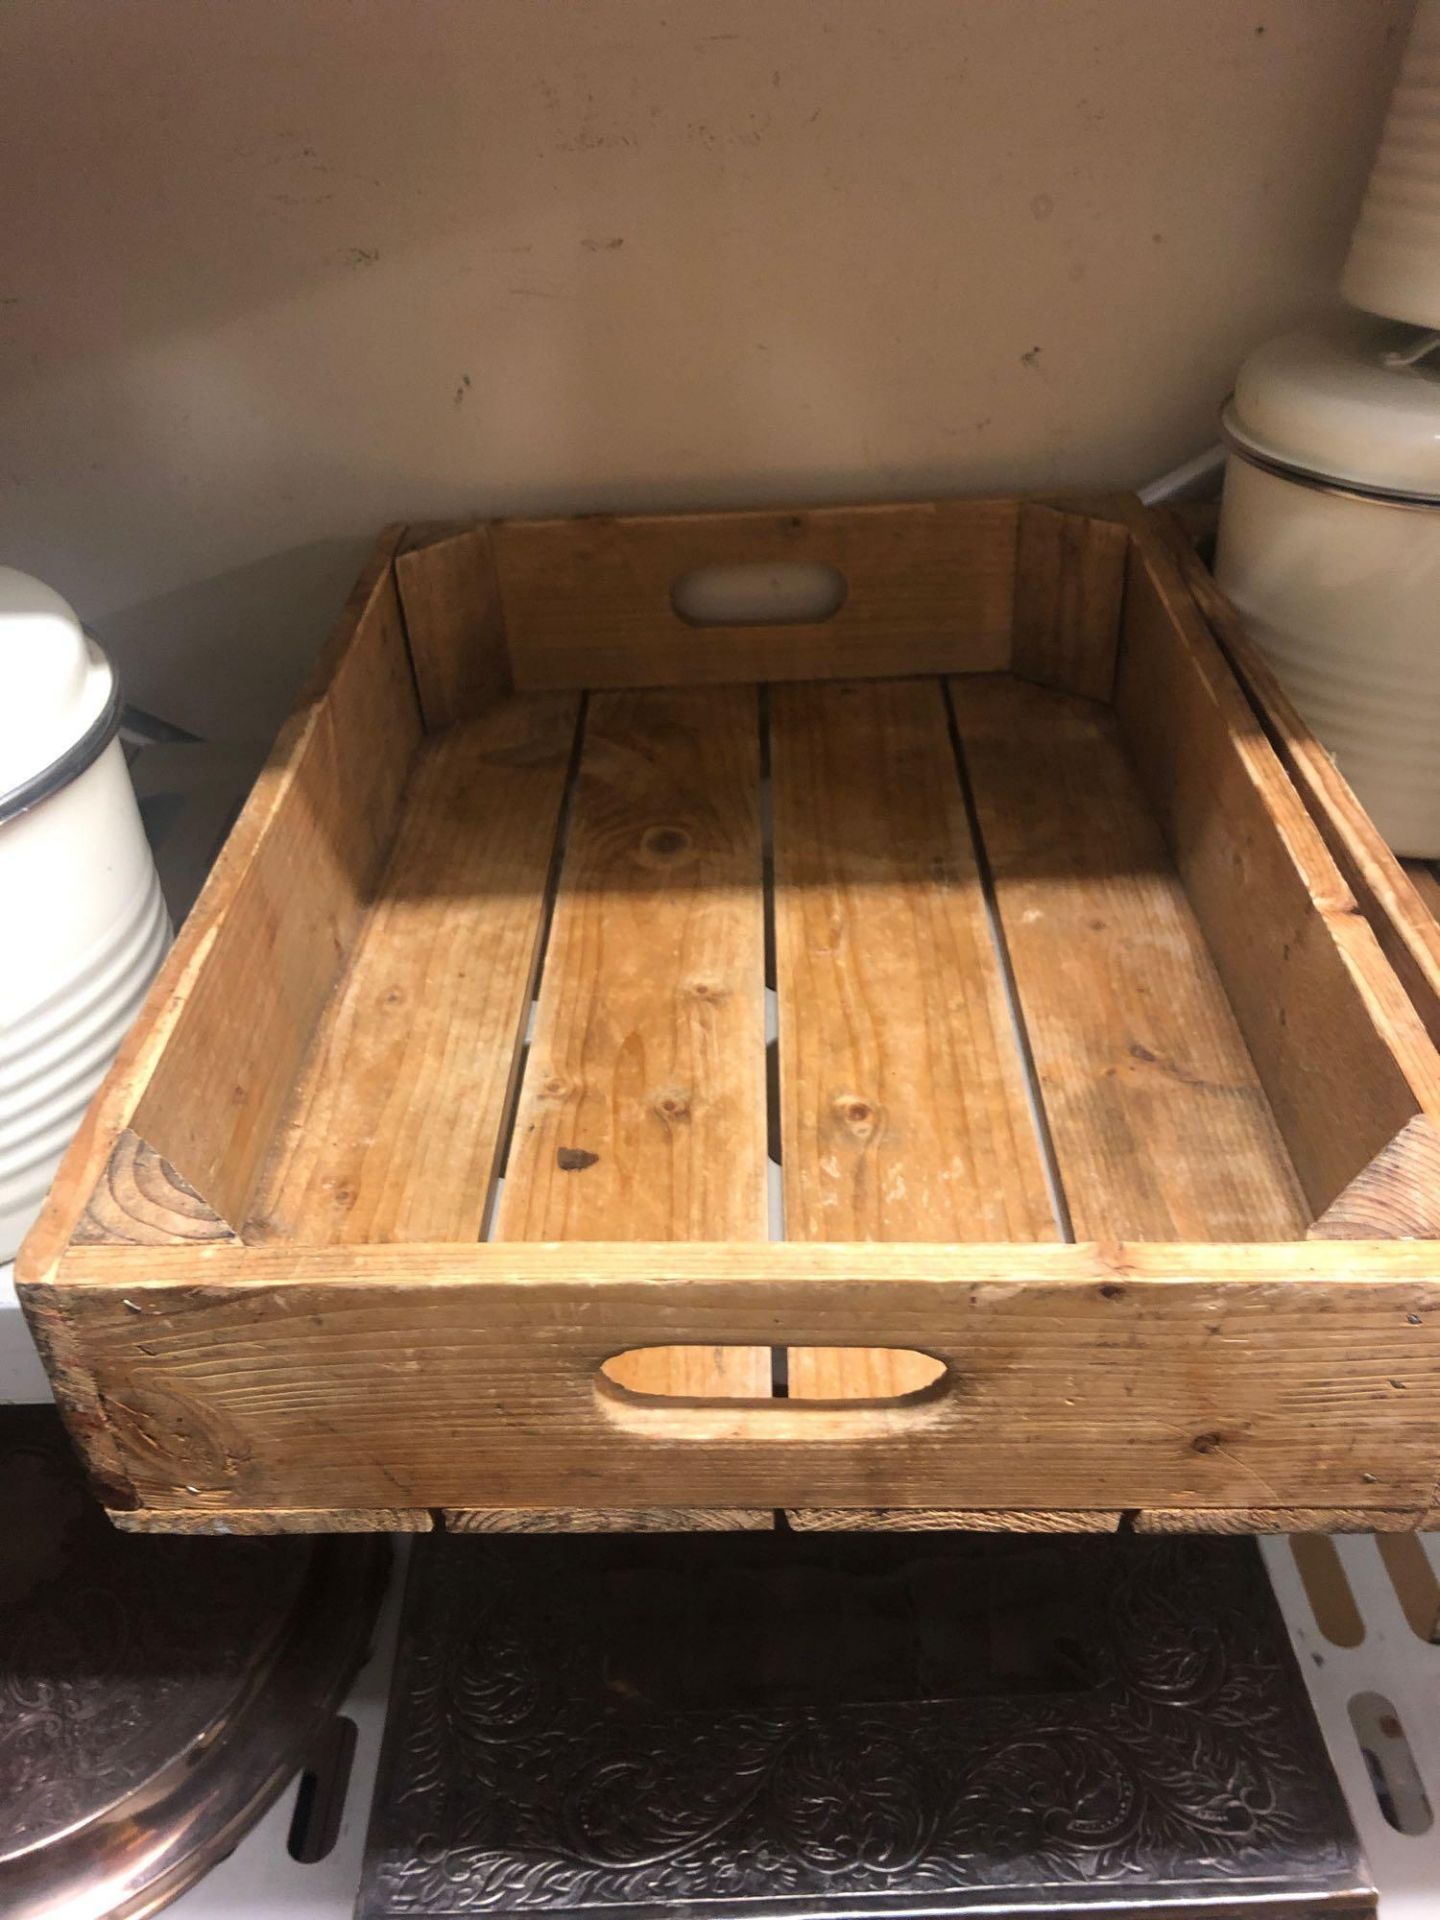 10 X Various Sizes Wooden Crates And Two Wicker Display Baskets